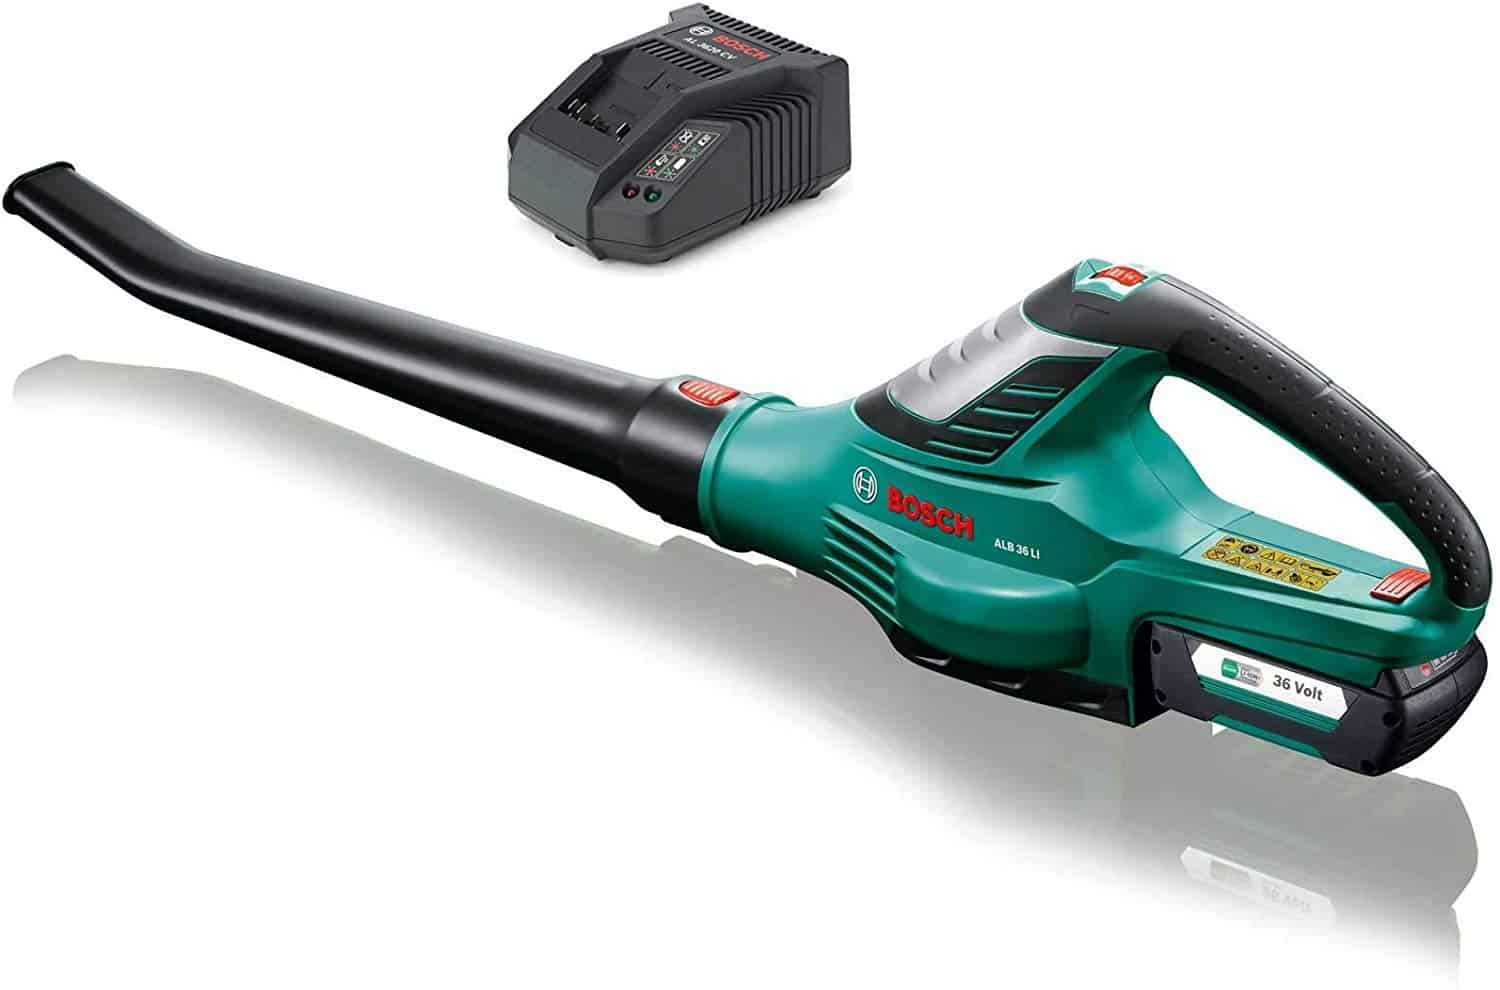 Bosch Professional Gbl 18 V 120 Cordless Blower Review